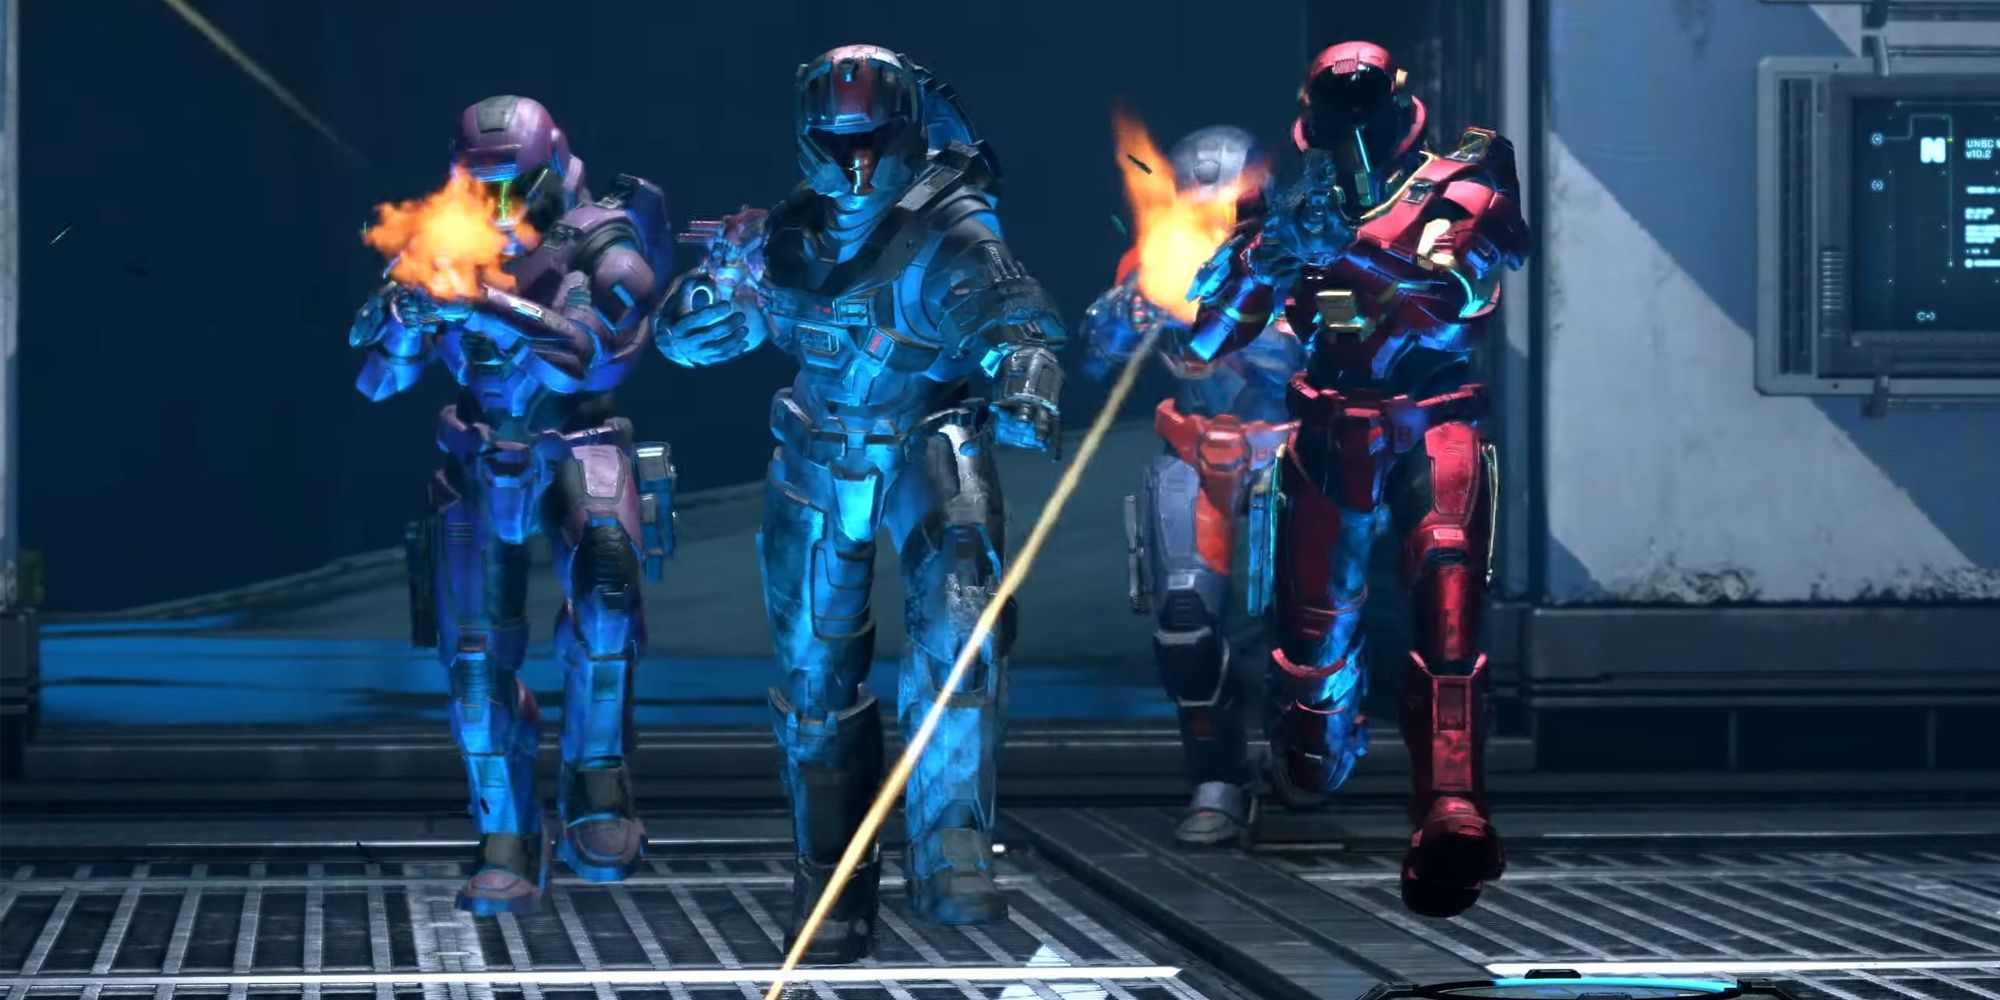 Group of four players shooting in Halo, moving towards the screen in Team Slayer mode.